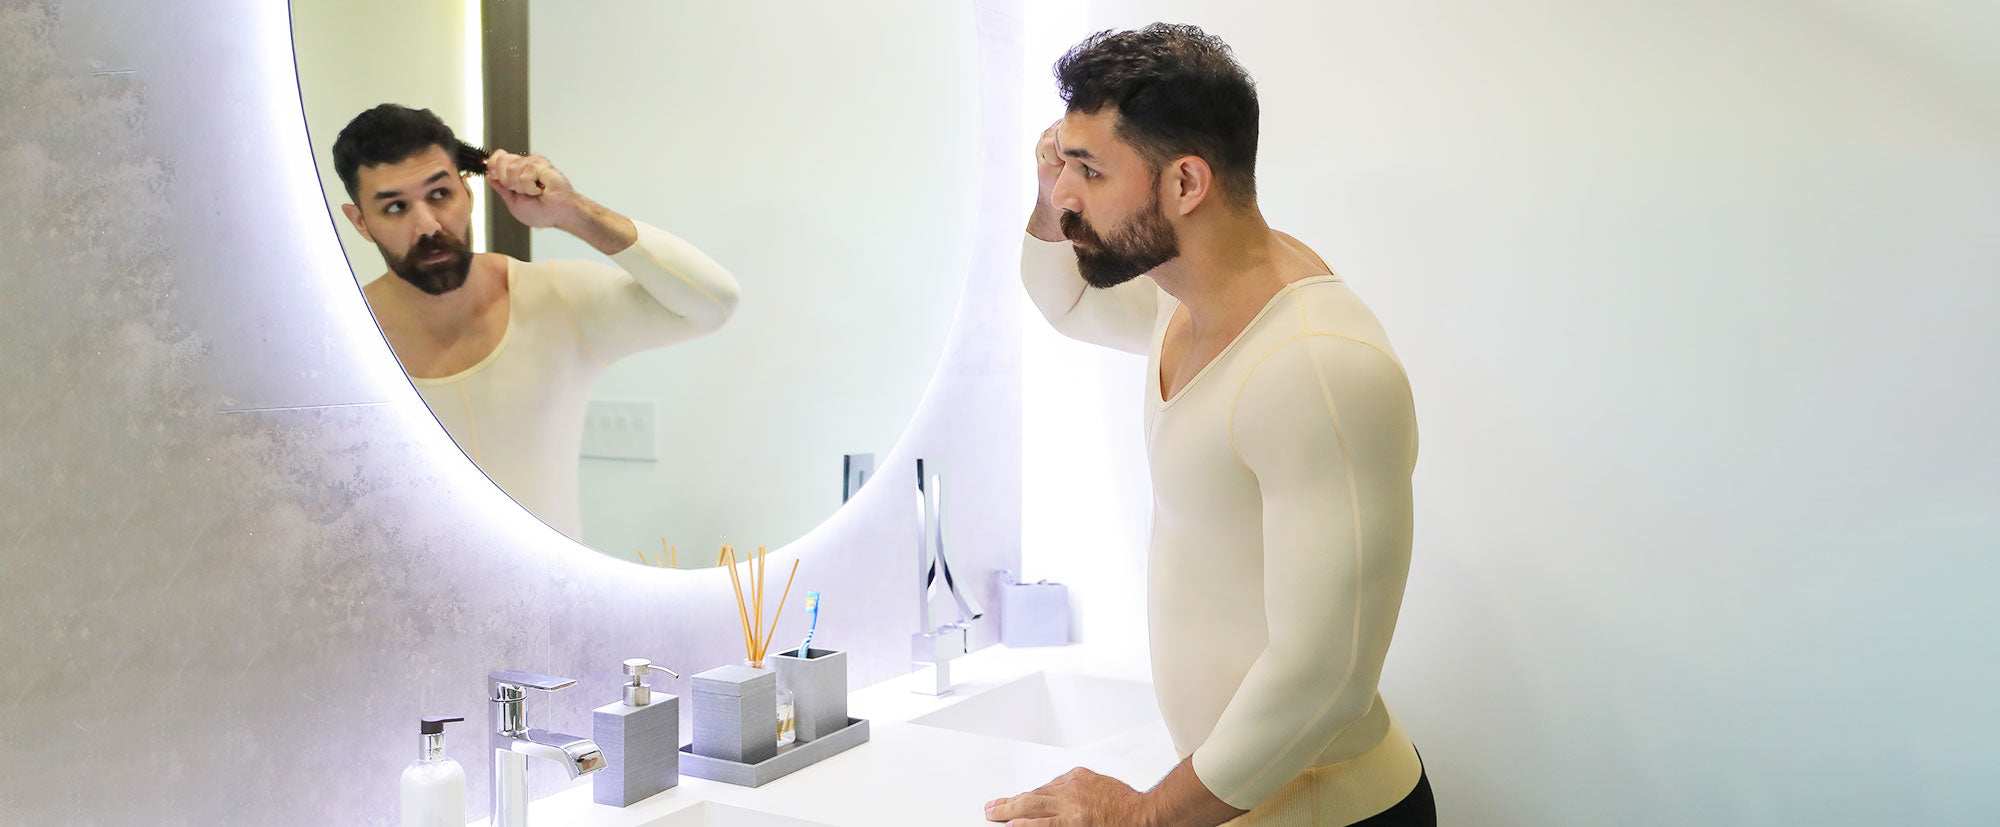 Man in compression garment combing hair in mirror